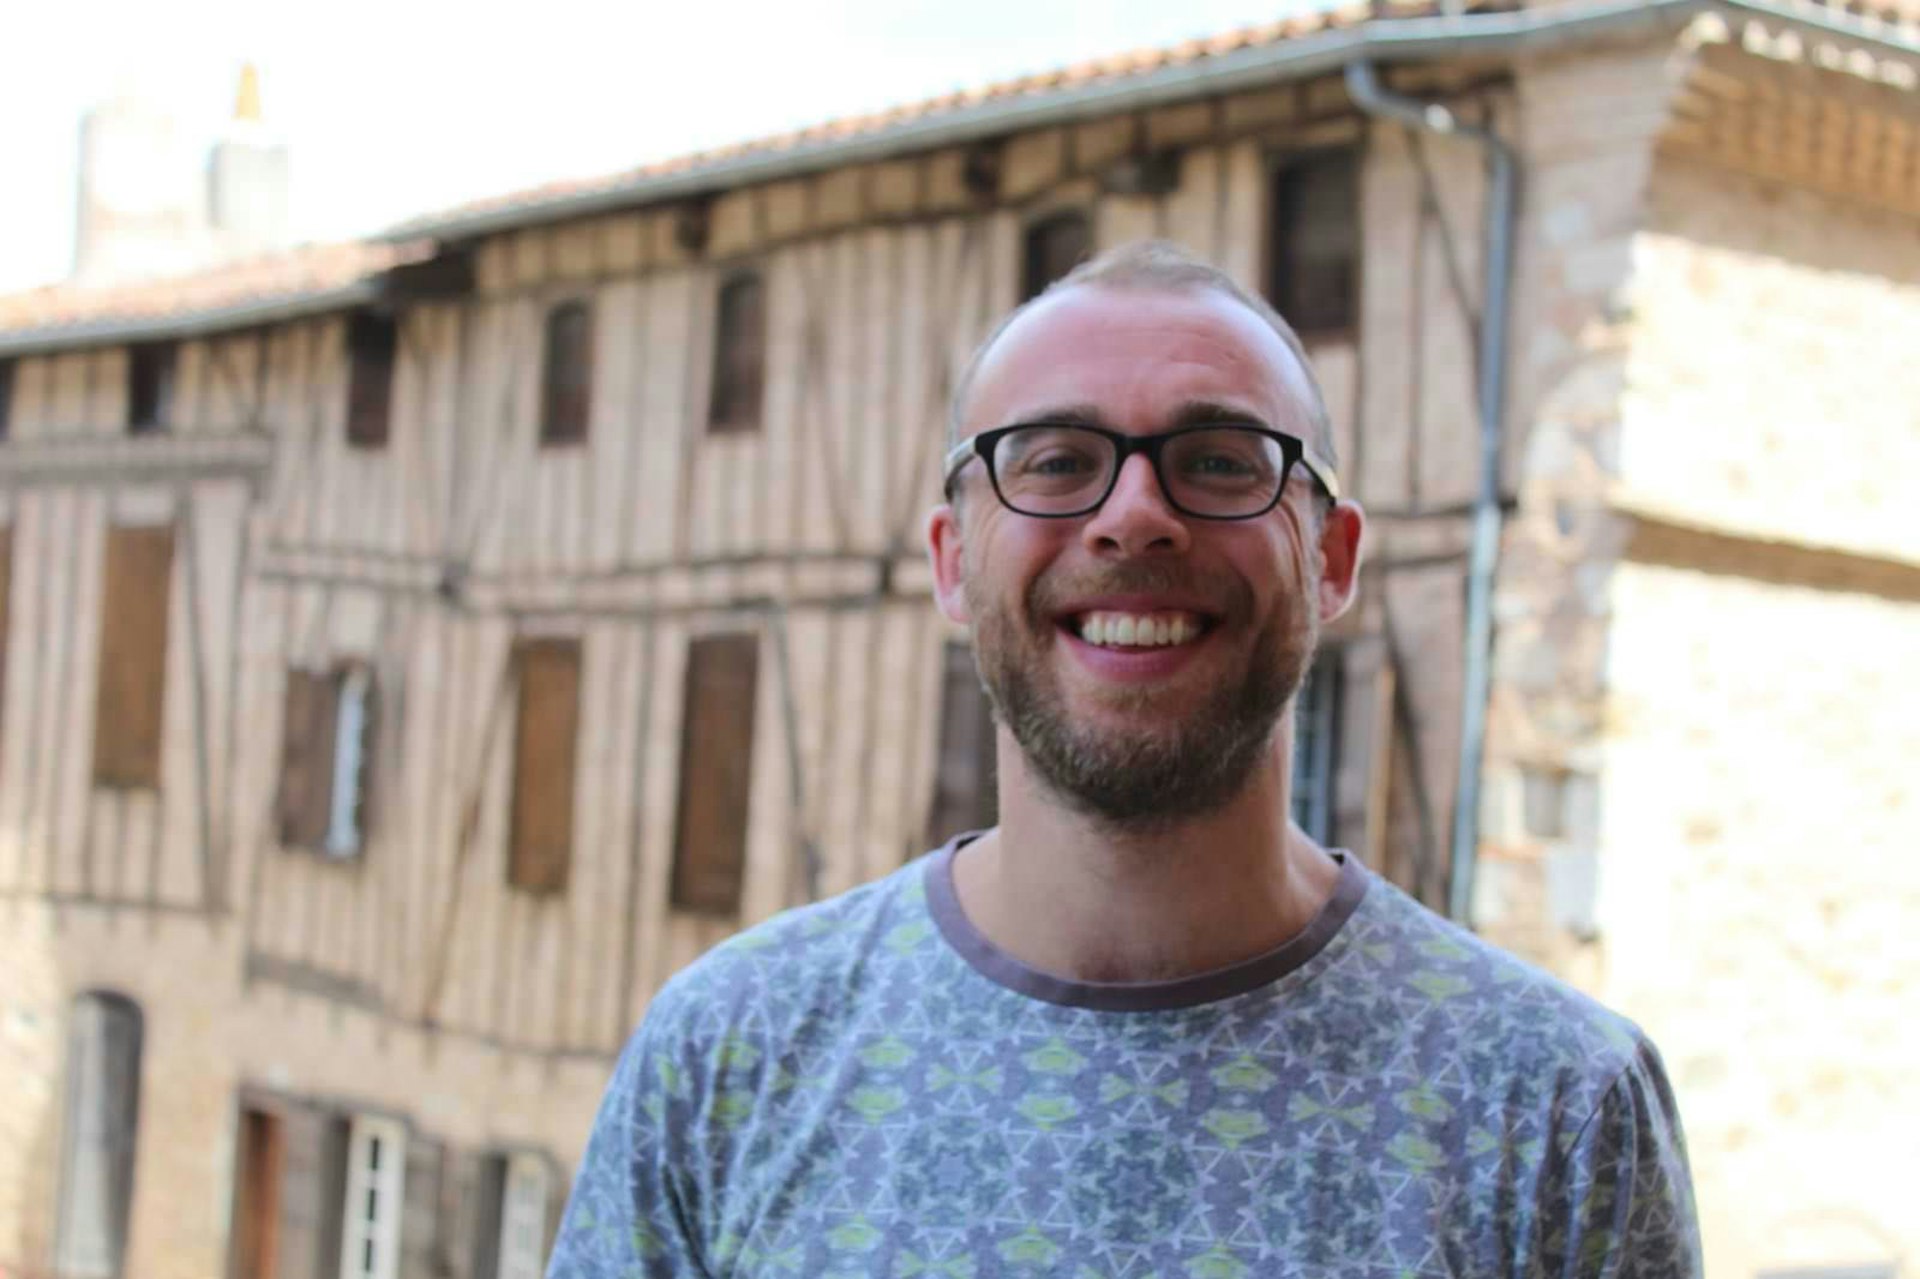 Tarn travel - Lonely Planet editor Tom Stainer in front of an old timber building in the Tarn region of France